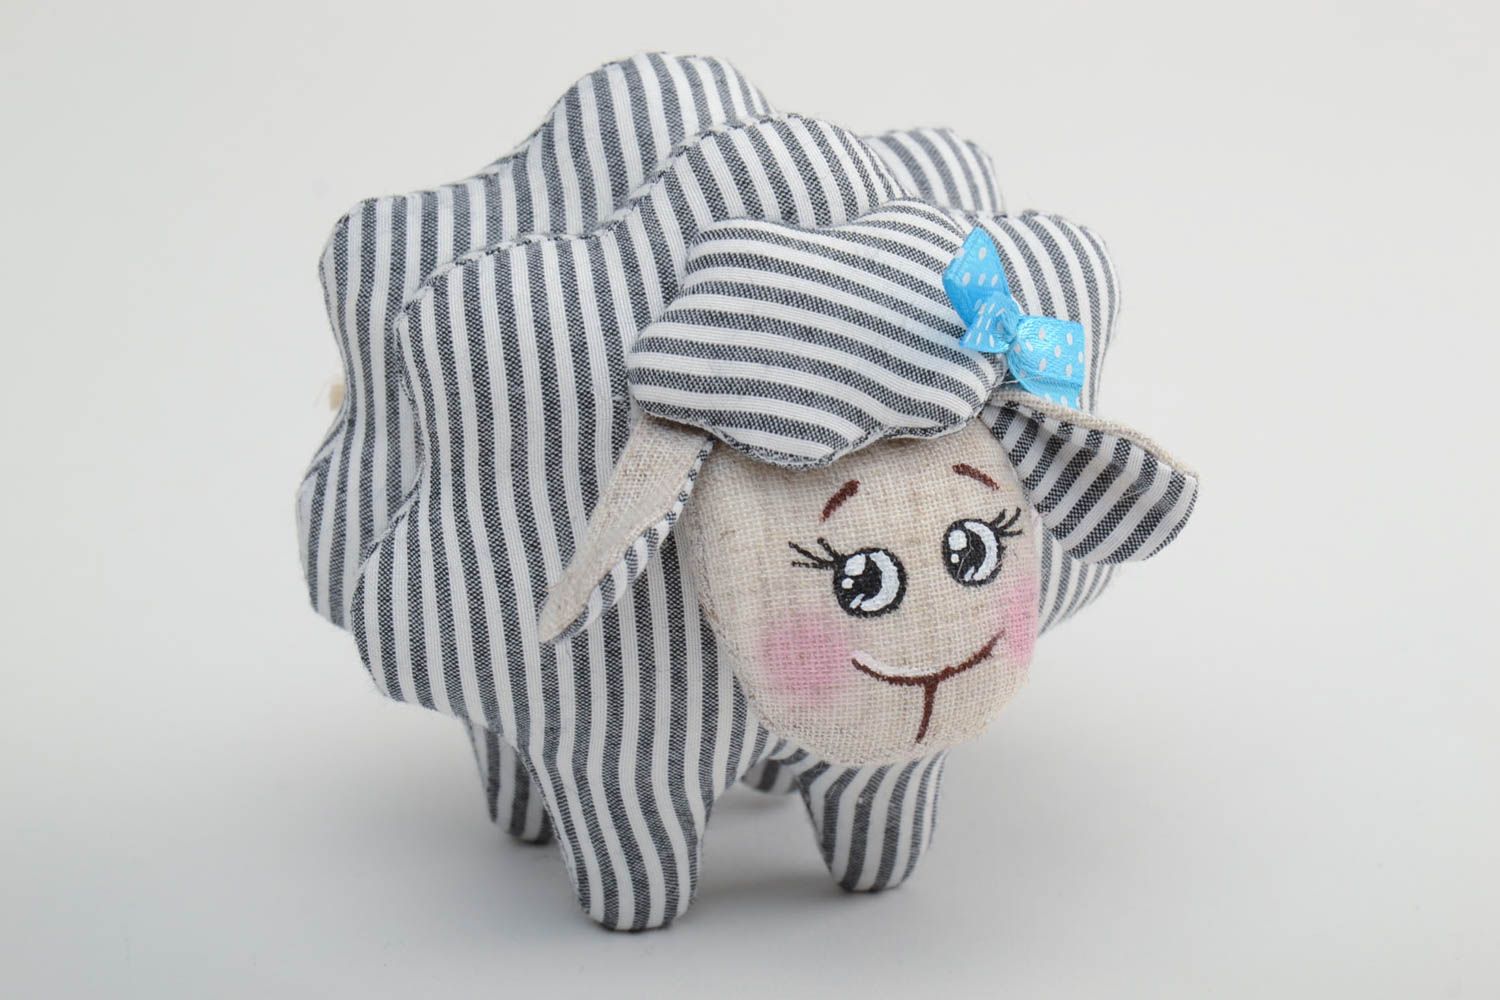 Handmade small soft toy sewn of striped linen fabric painted with acrylics Lamb photo 2